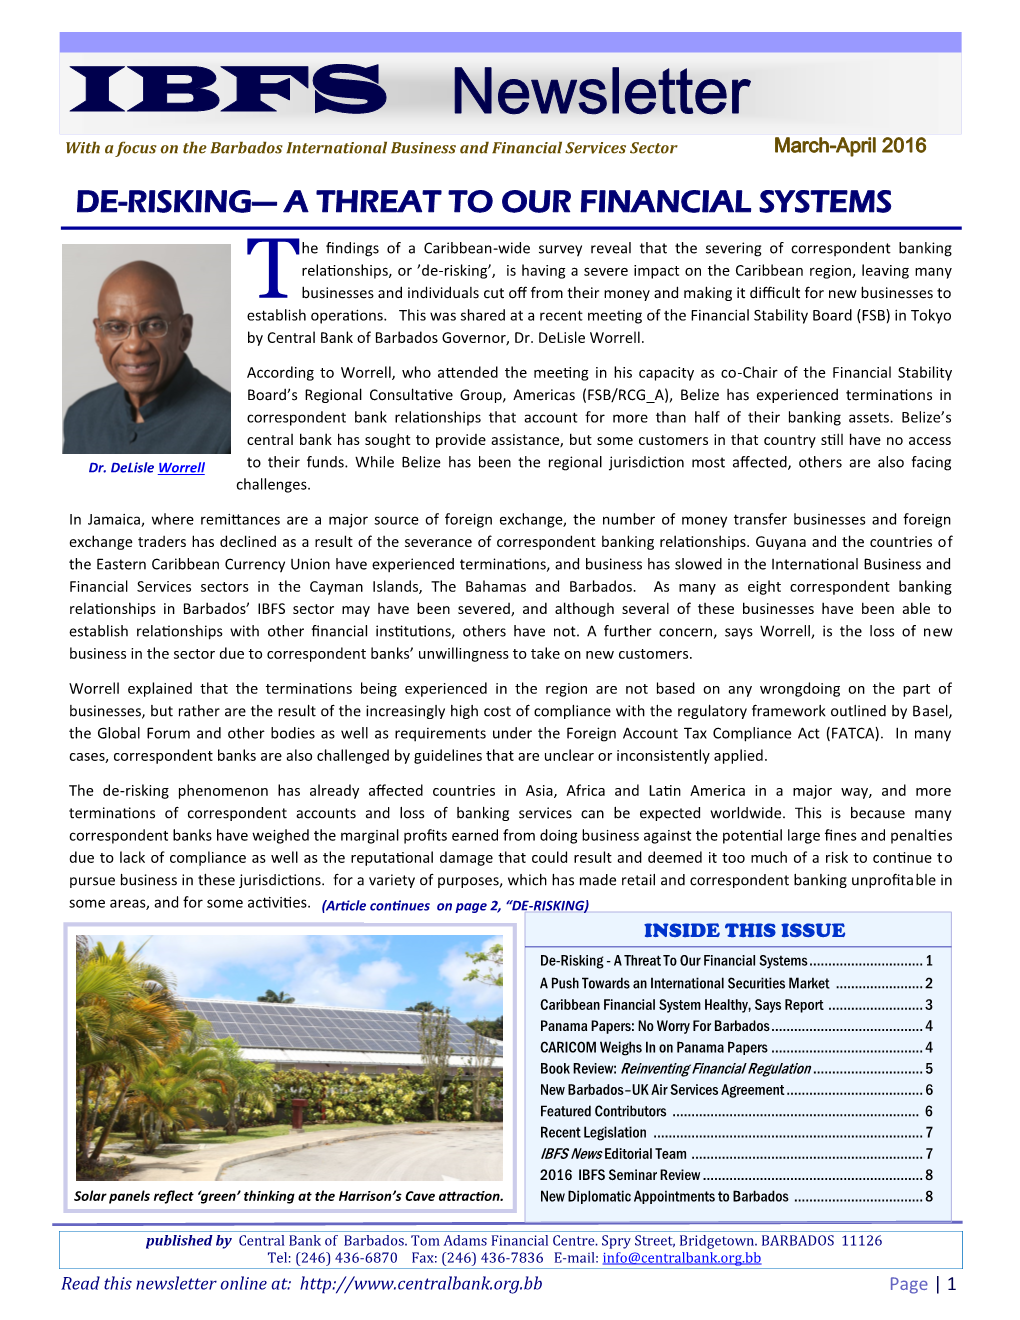 Newsletter with a Focus on the Barbados International Business and Financial Services Sector March-April 2016